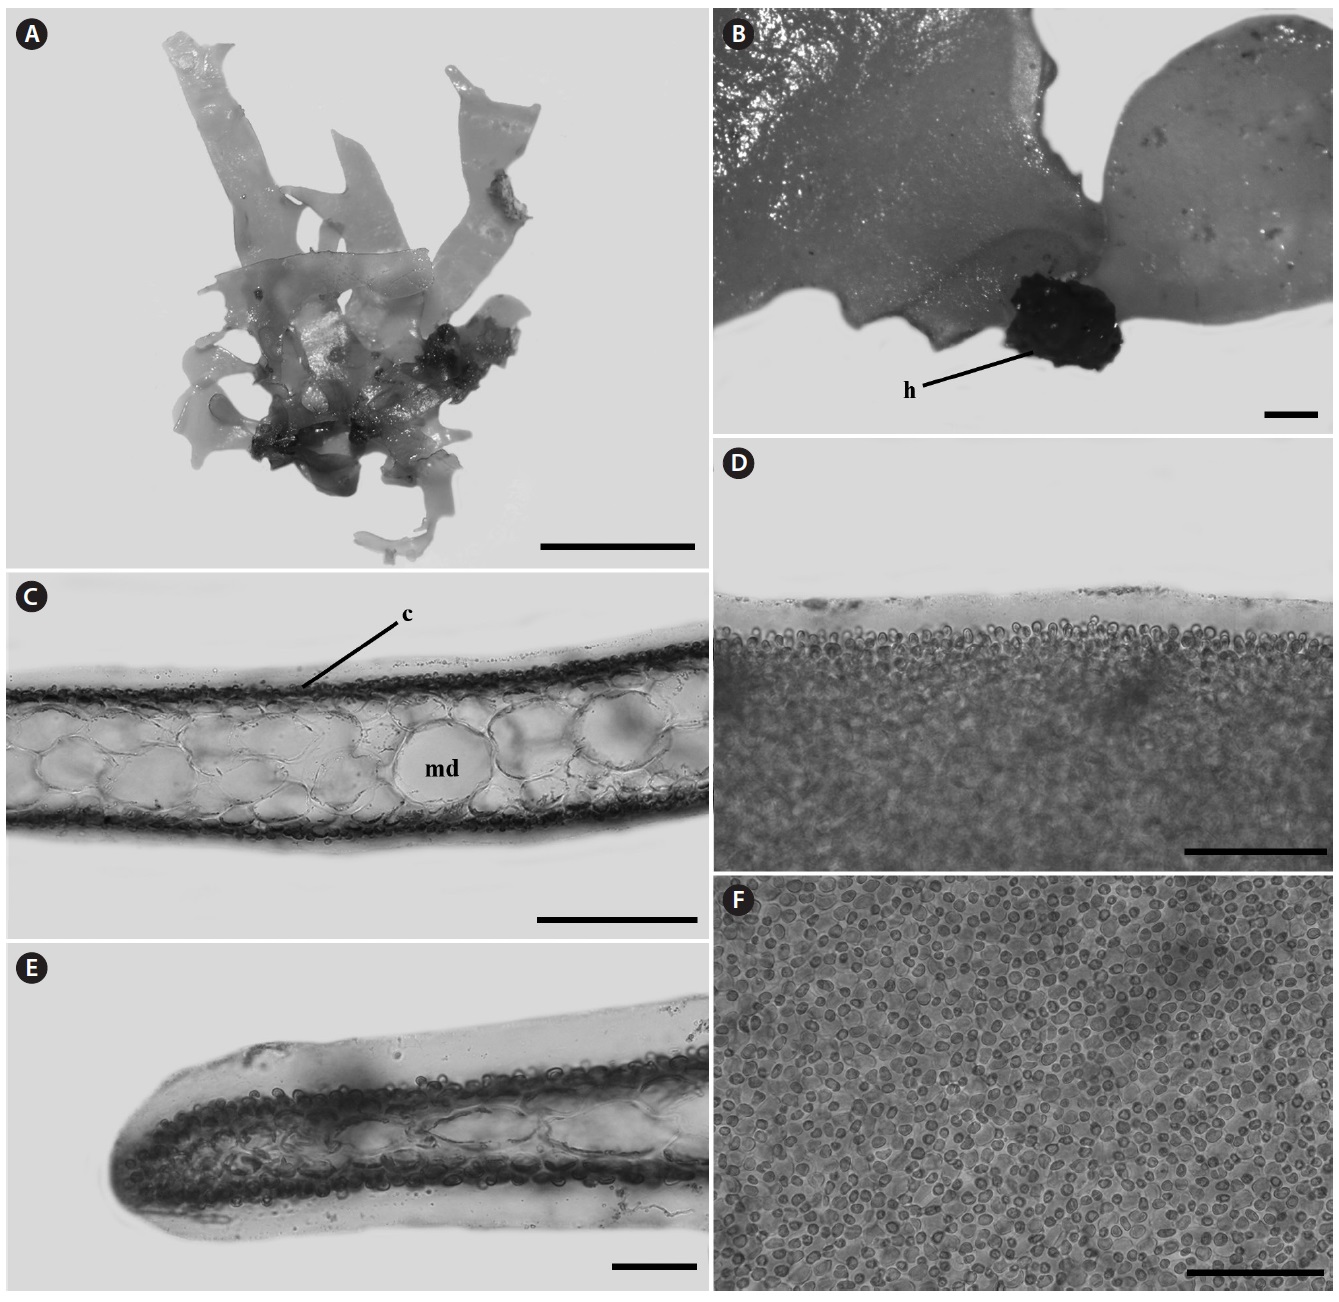 Leptofauchea rhodymenioides from Juk-do, Ulreng-gun, Korea. (A) Vegetative plant. (B) Details view of small discoid holdfast (h). (C) Cross section
view showing cortex (c) and medulla (md). (D) Marginal part of thallus showing gelatinous membrane. (E) Cross section view of marginal thallus. (F) Surface
of thallus. Scale bars represent: A, 2cm; B, 539.05 μm; C-F, 50 μm.